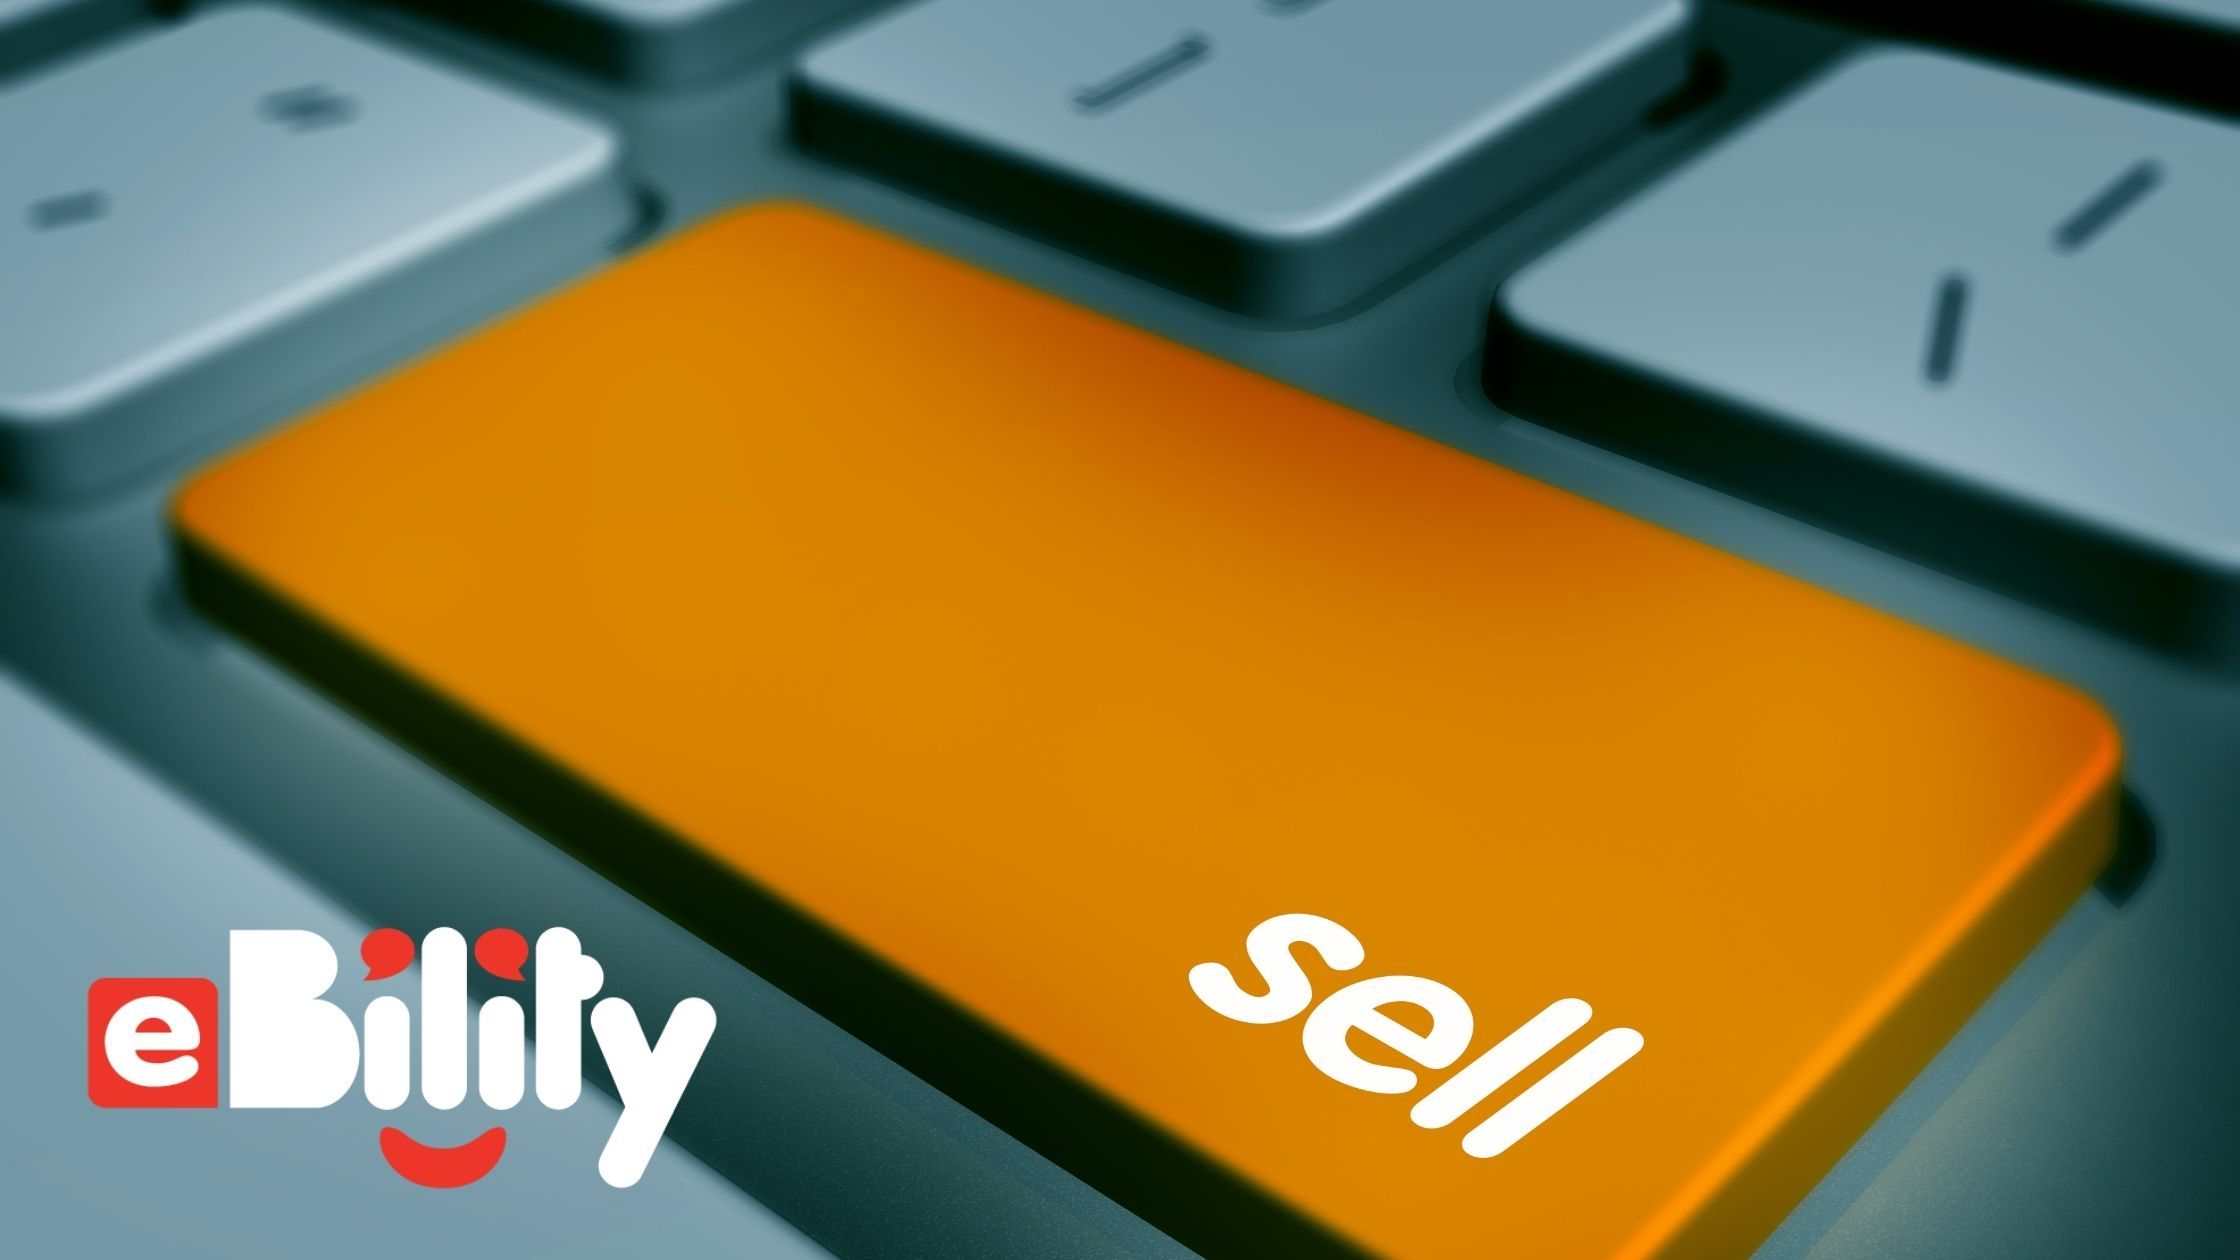 sell button on a computer keyboard